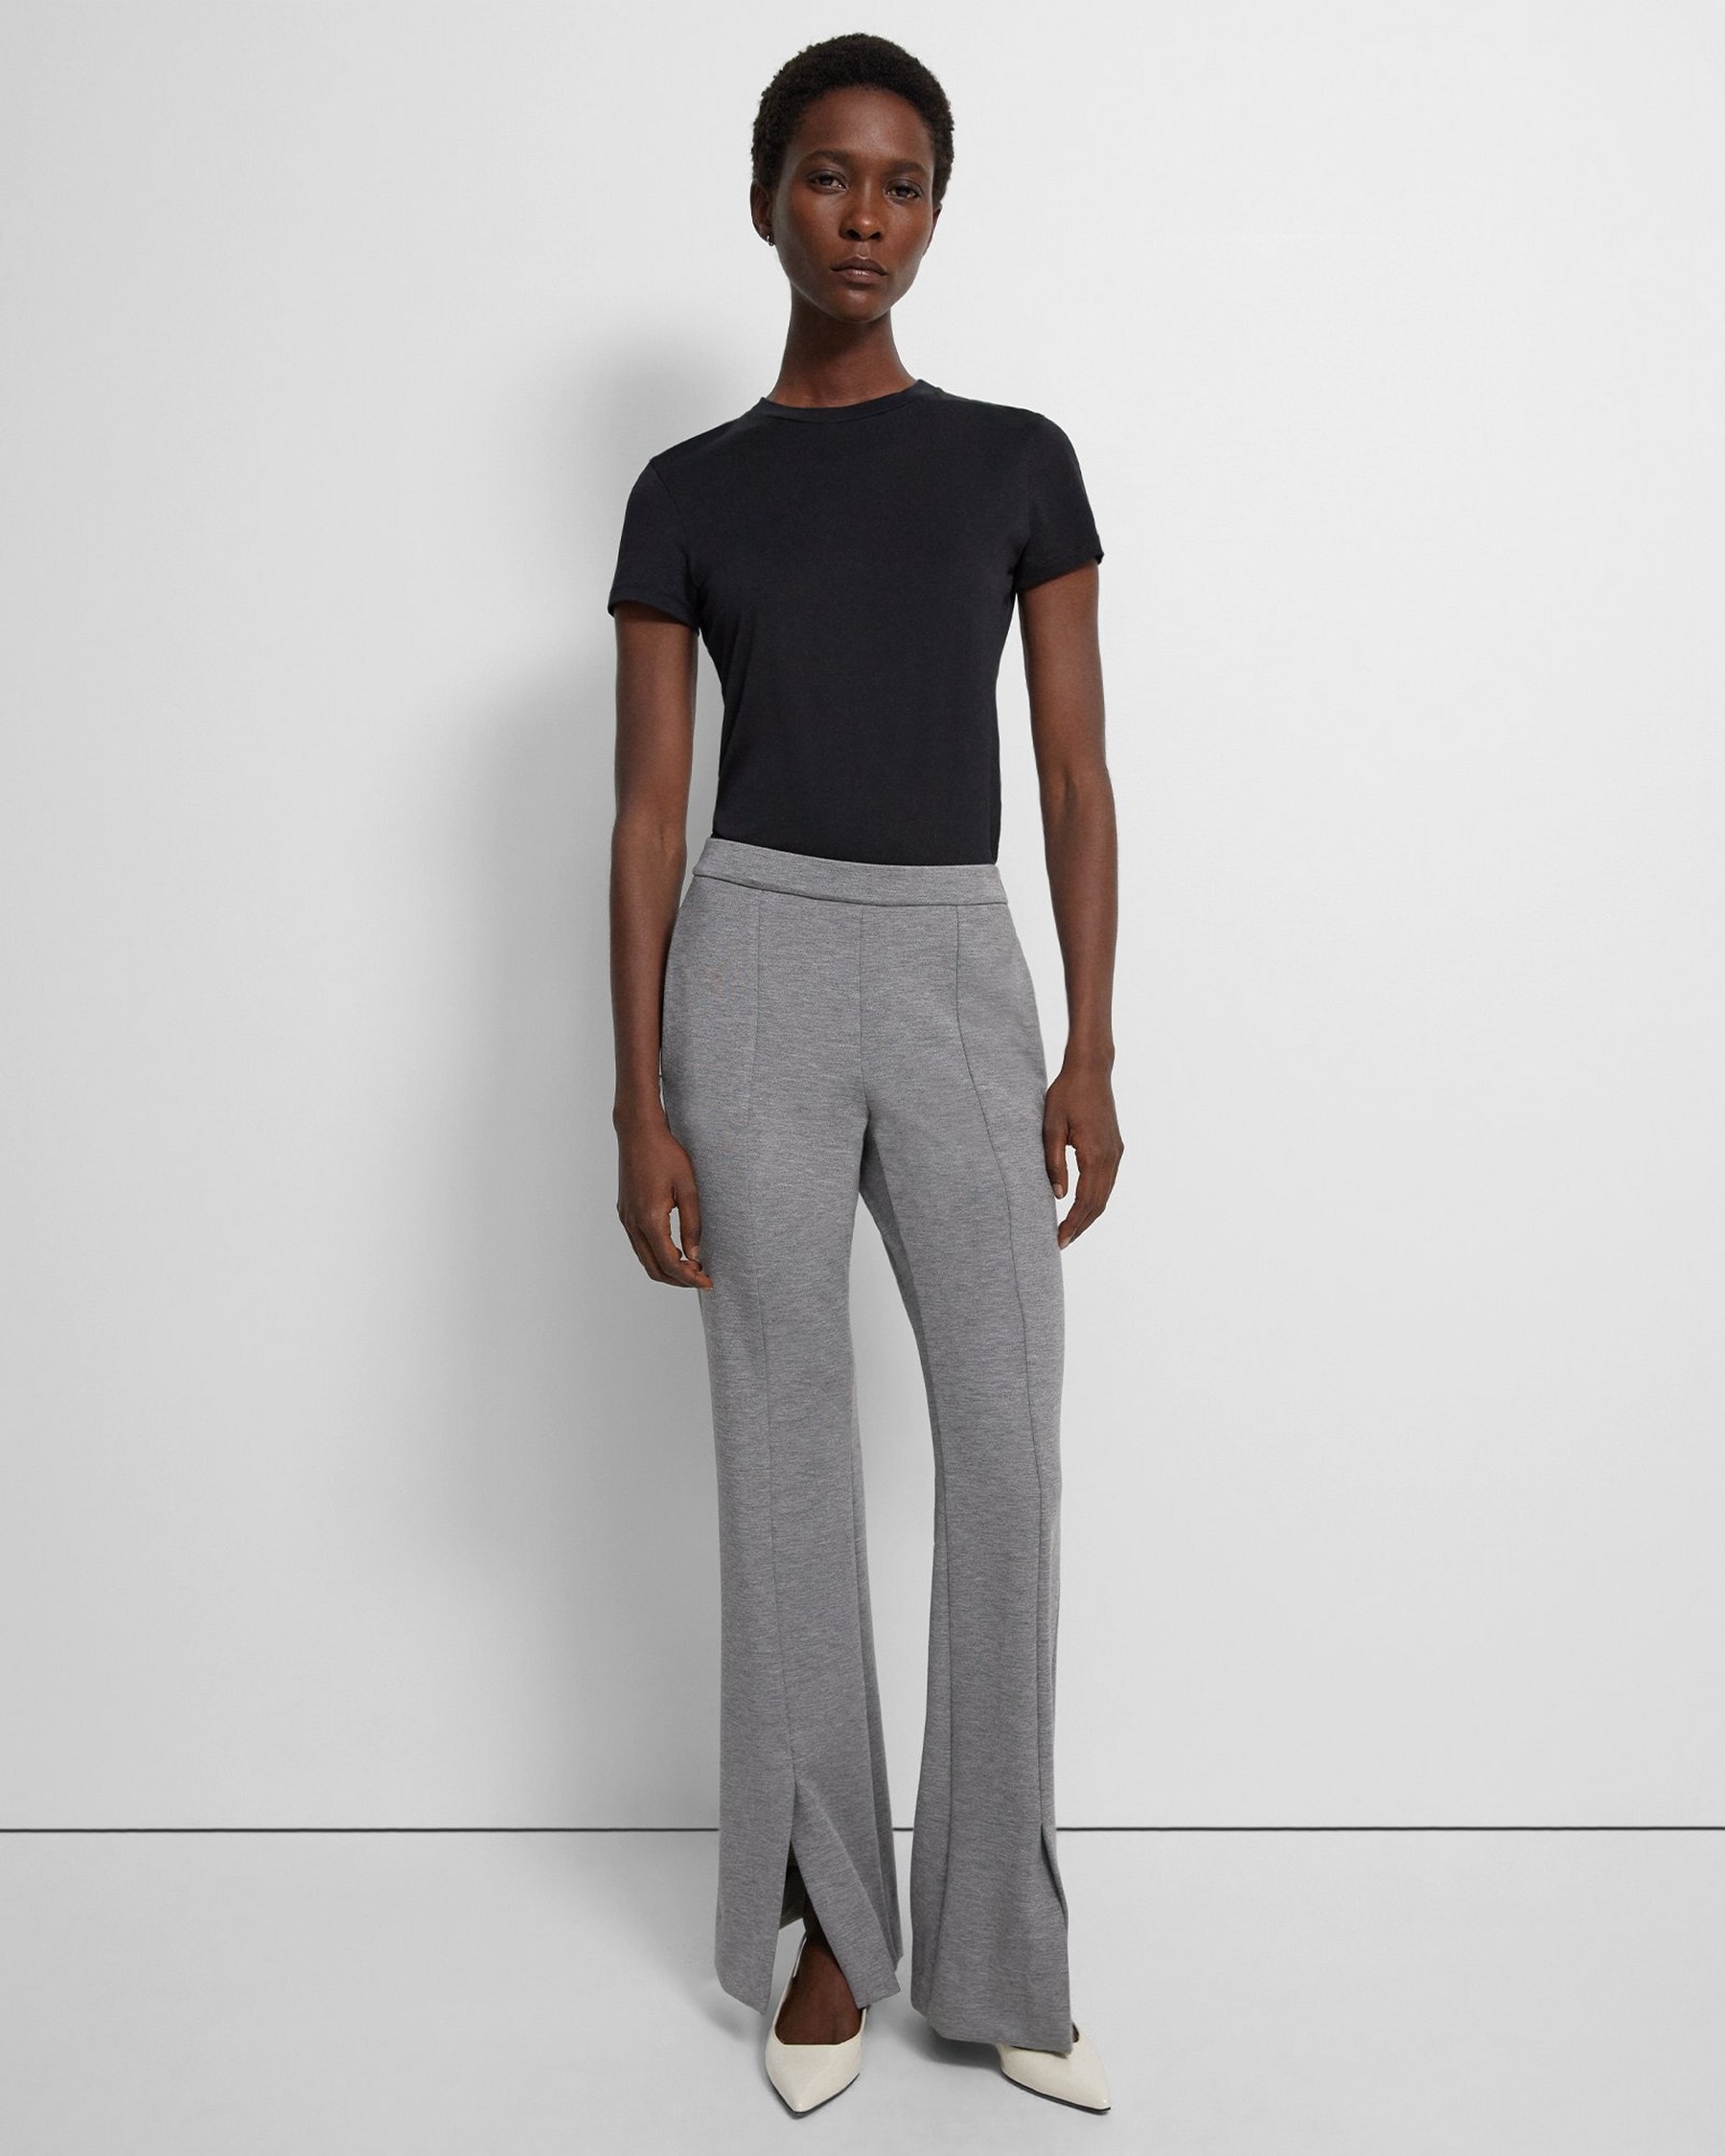 Theory Slit Demitria Pant in Double-Knit Jersey